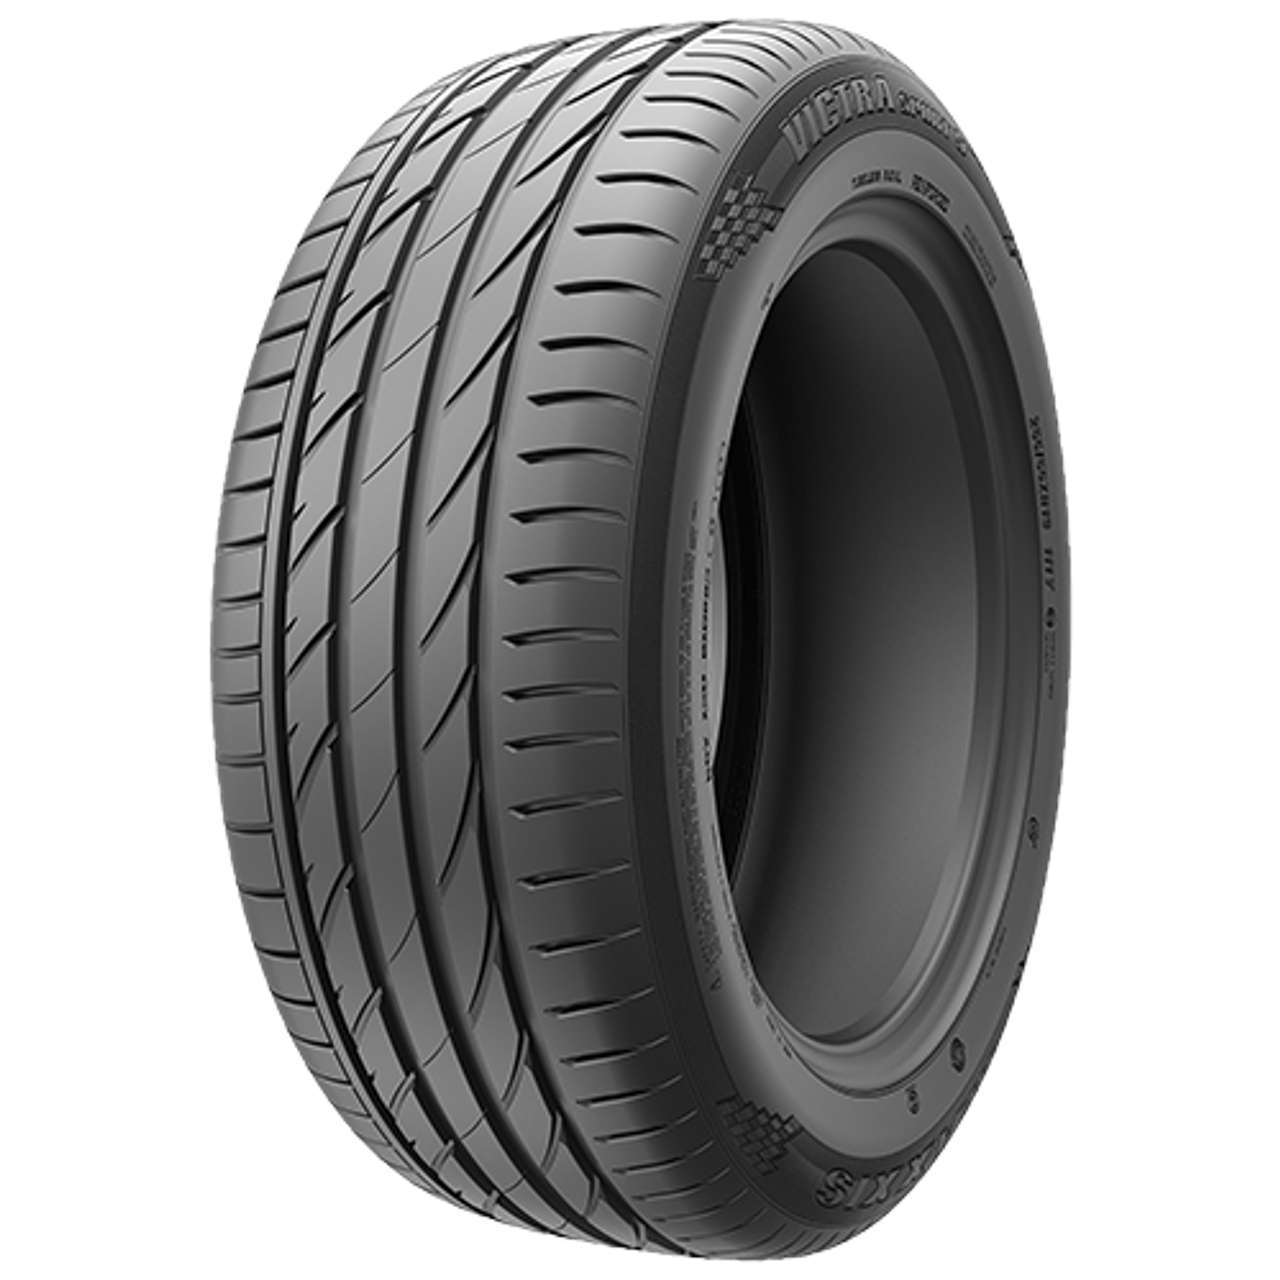 MAXXIS VICTRA SPORT 5 (VS5) 275/40ZR19 105Y MFS BSW